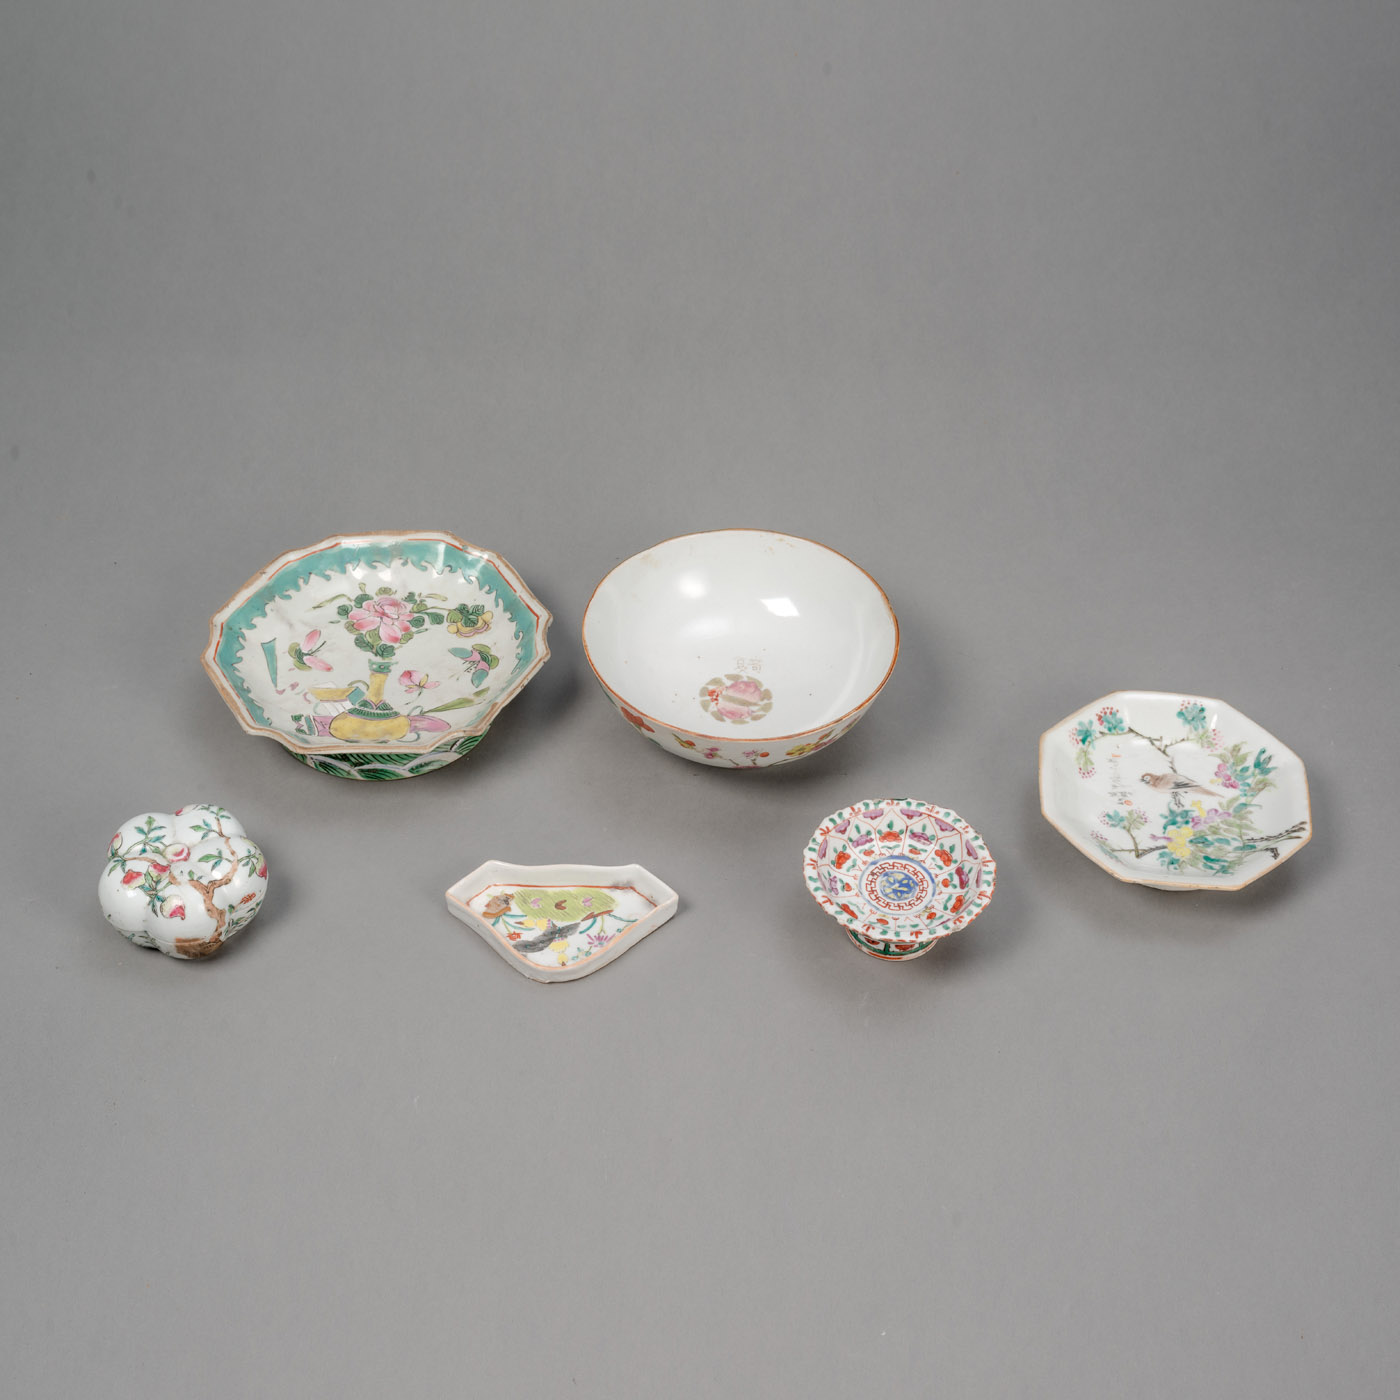 <b>SIX 'FAMILLE ROSE' PORCELAIN BOWLS AND DISHES</b>